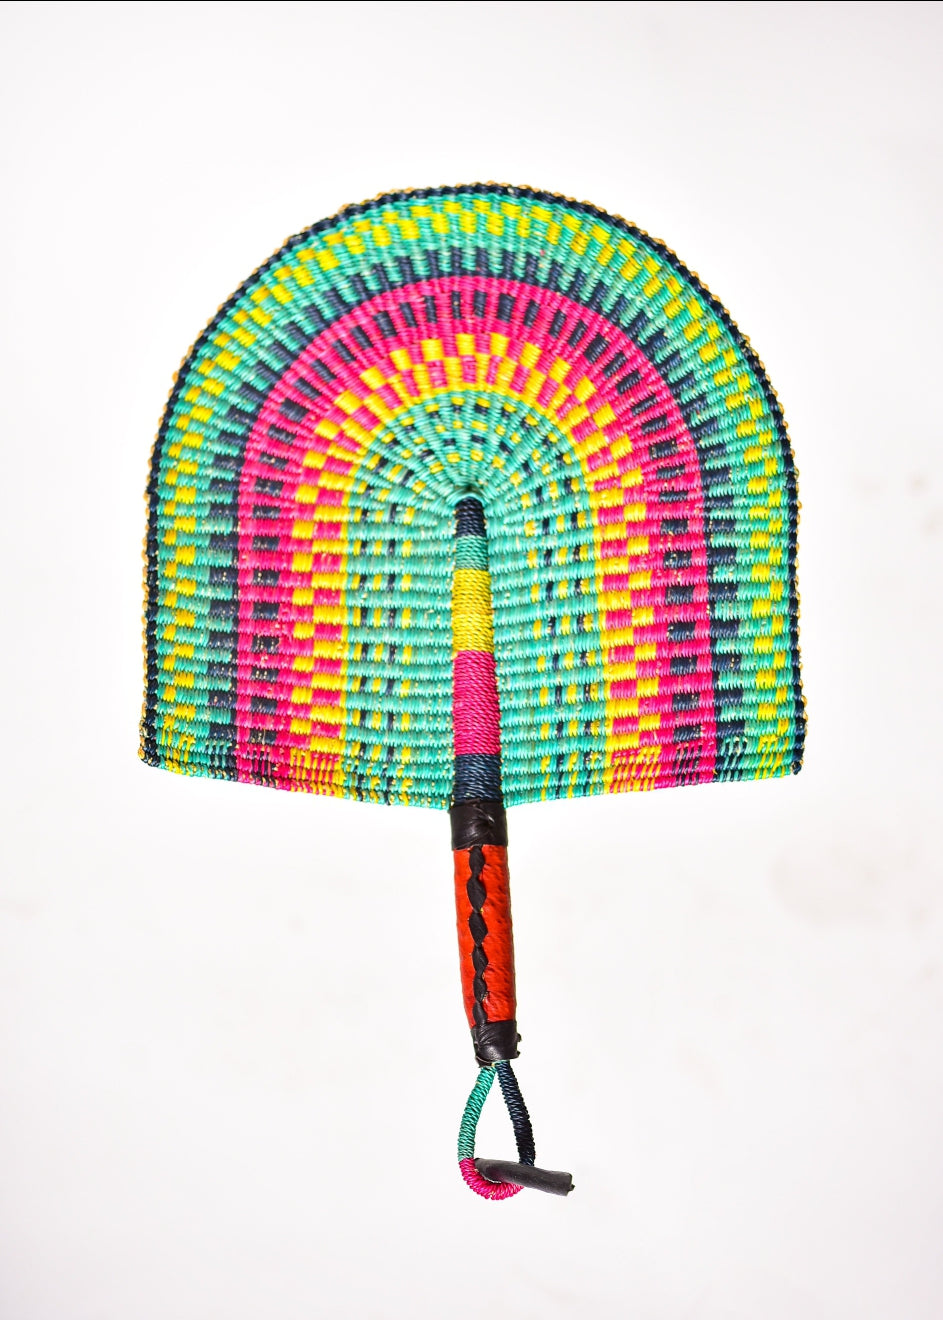 Chilton Straw Woven Handfan(Leather Based Handle)